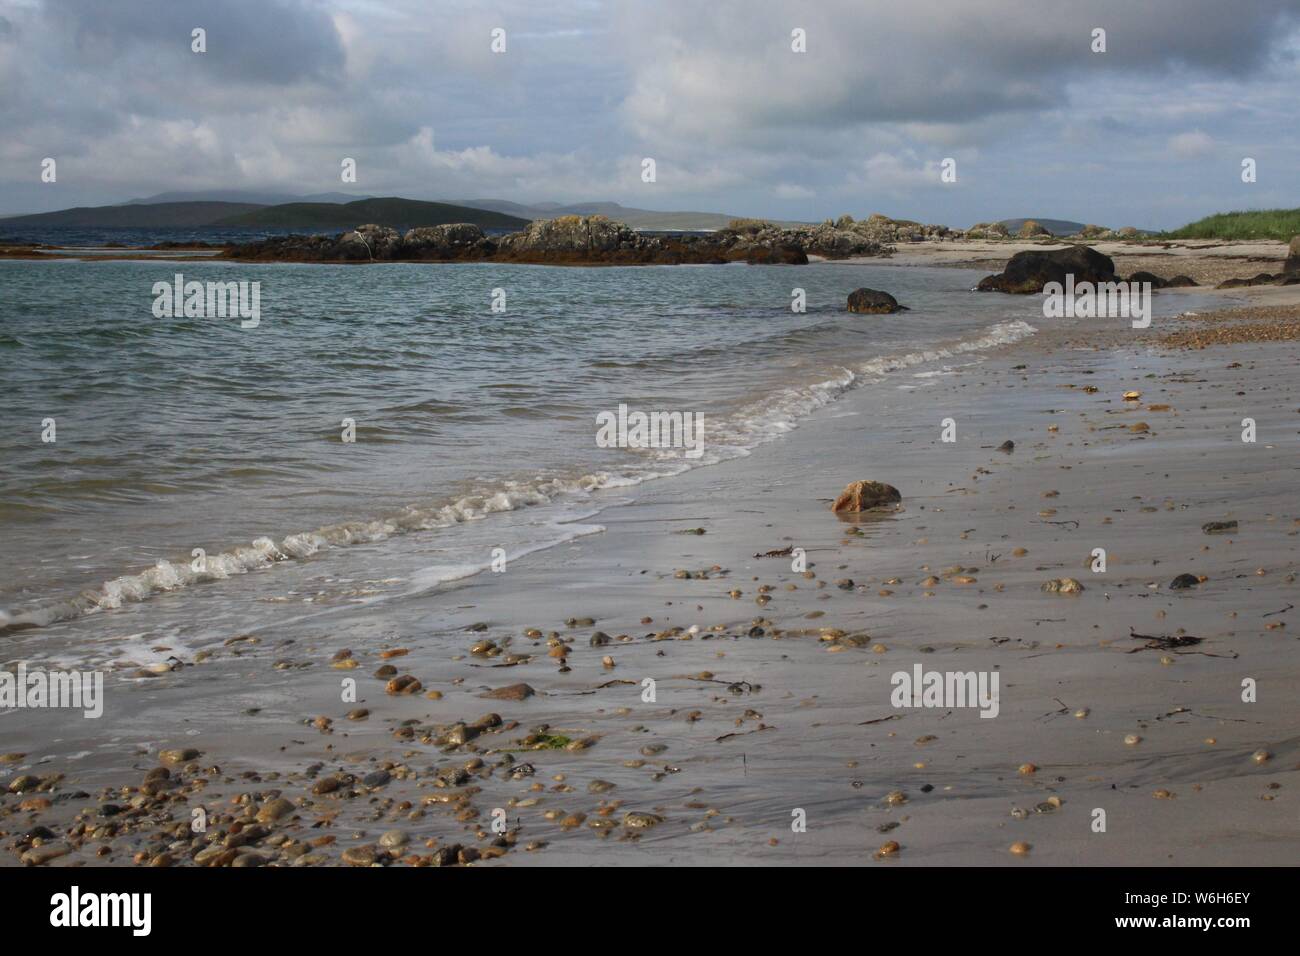 Beach at East Kilbride, South Uist, Outer Hebrides, Scotland Stock Photo